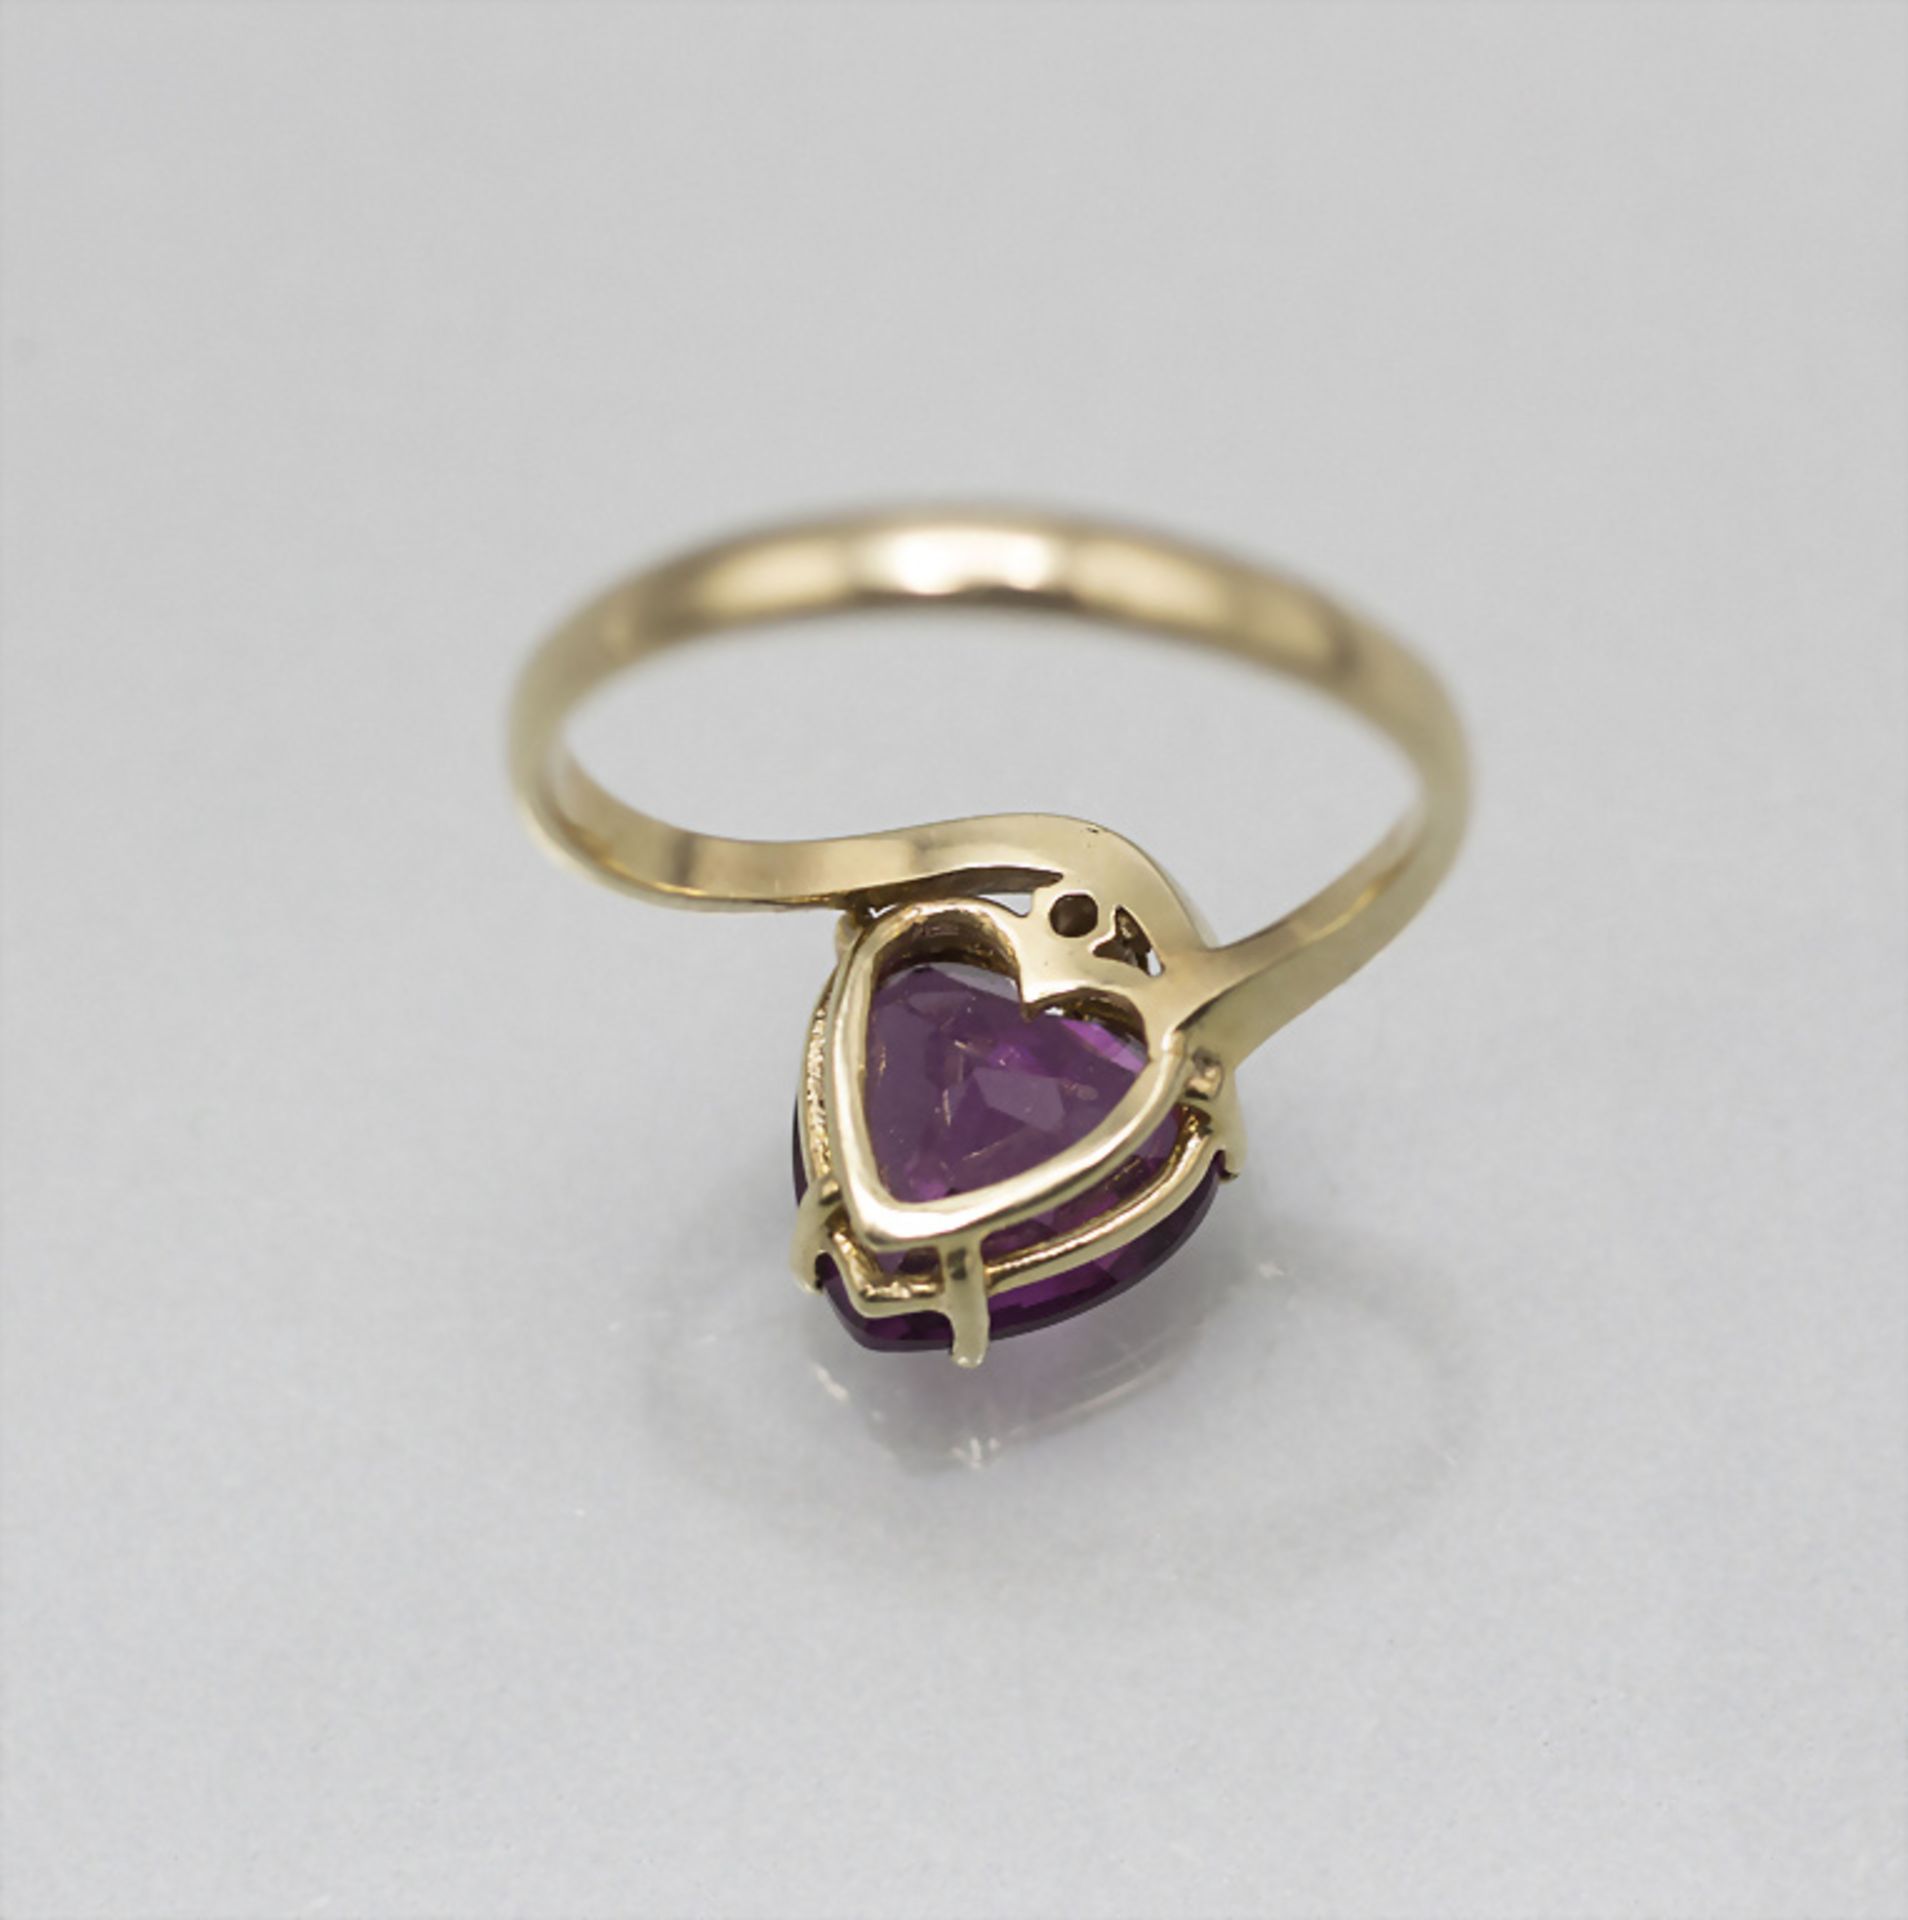 Damenring mit Amethyst / A 14 ct ladies gold ring with an amethyst - Image 3 of 3